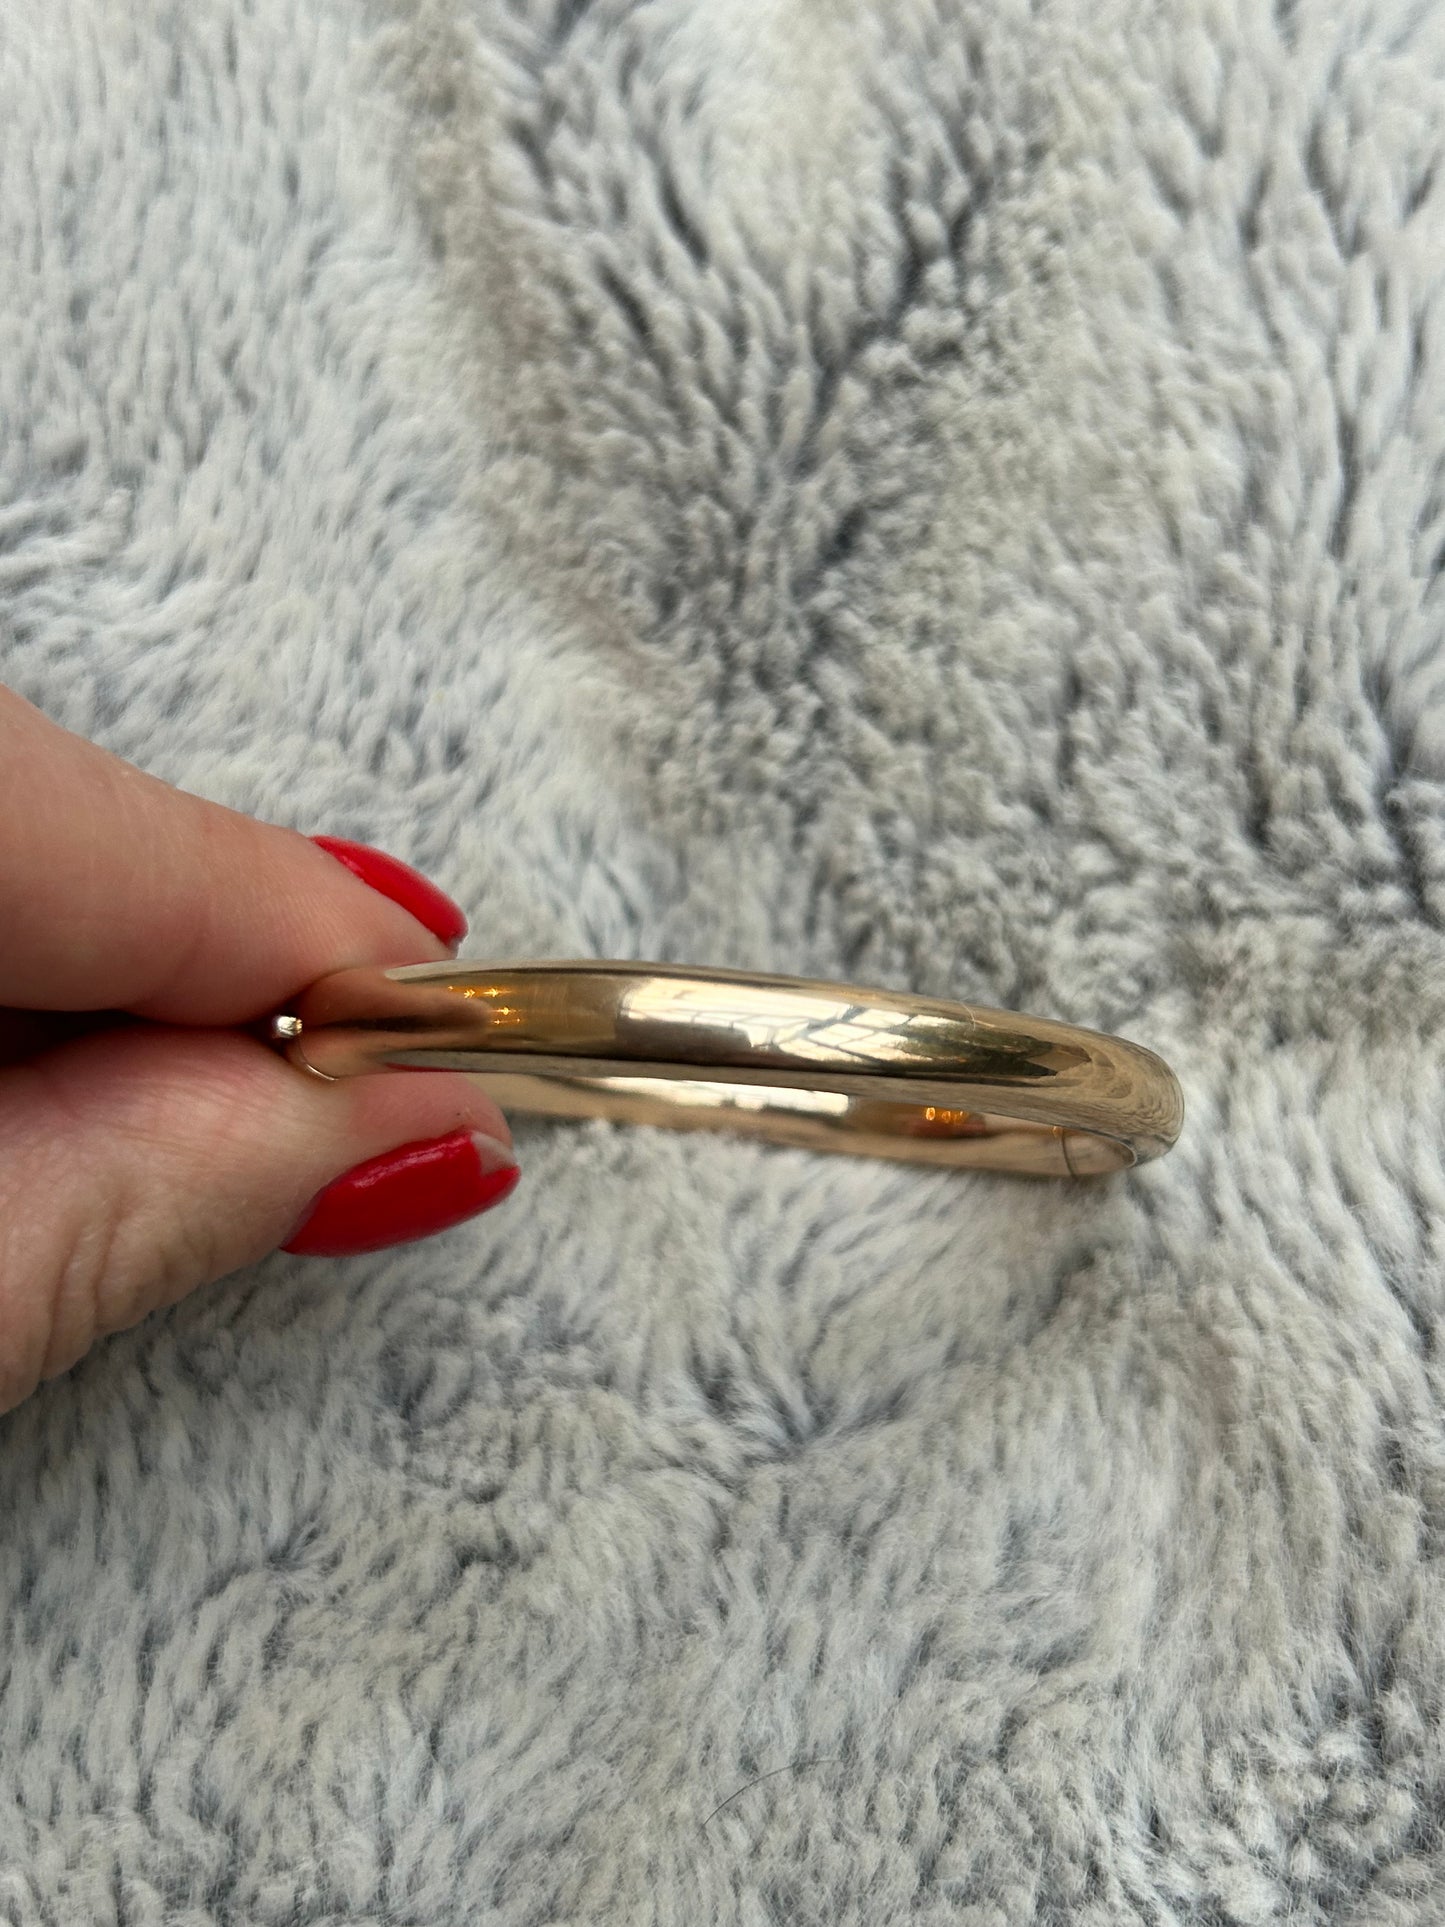 Vintage Hinged Rolled Gold Bangle (small)